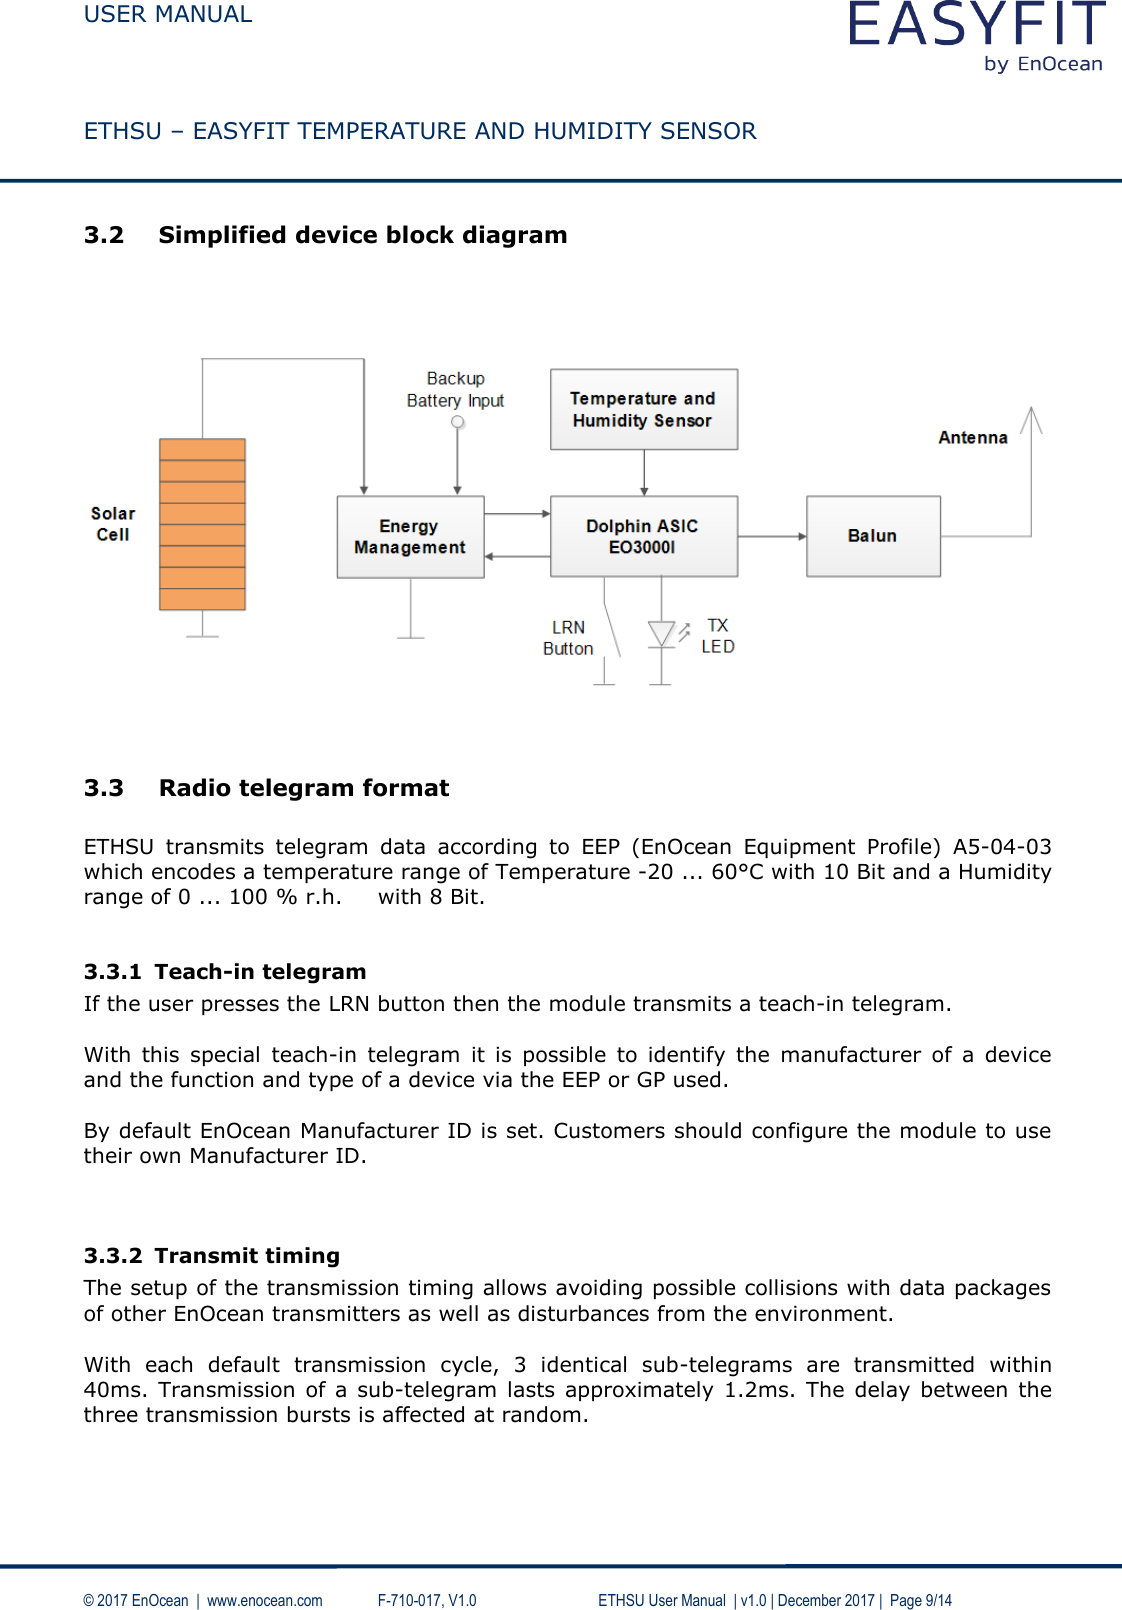  USER MANUAL    ETHSU – EASYFIT TEMPERATURE AND HUMIDITY SENSOR  © 2017 EnOcean  |  www.enocean.com   F-710-017, V1.0        ETHSU User Manual  | v1.0 | December 2017 |  Page 9/14  3.2 Simplified device block diagram       3.3 Radio telegram format  ETHSU  transmits  telegram  data  according  to  EEP  (EnOcean  Equipment  Profile)  A5-04-03 which encodes a temperature range of Temperature -20 ... 60°C with 10 Bit and a Humidity range of 0 ... 100 % r.h.  with 8 Bit.  3.3.1 Teach-in telegram If the user presses the LRN button then the module transmits a teach-in telegram.   With  this  special  teach-in  telegram  it  is  possible  to  identify  the  manufacturer  of  a  device and the function and type of a device via the EEP or GP used.   By default EnOcean Manufacturer ID is set. Customers should configure the module to use their own Manufacturer ID.    3.3.2 Transmit timing  The setup of the transmission timing allows avoiding possible collisions with data packages of other EnOcean transmitters as well as disturbances from the environment.   With  each  default  transmission  cycle,  3  identical  sub-telegrams  are  transmitted  within 40ms. Transmission  of a sub-telegram lasts  approximately  1.2ms. The delay between the three transmission bursts is affected at random.  